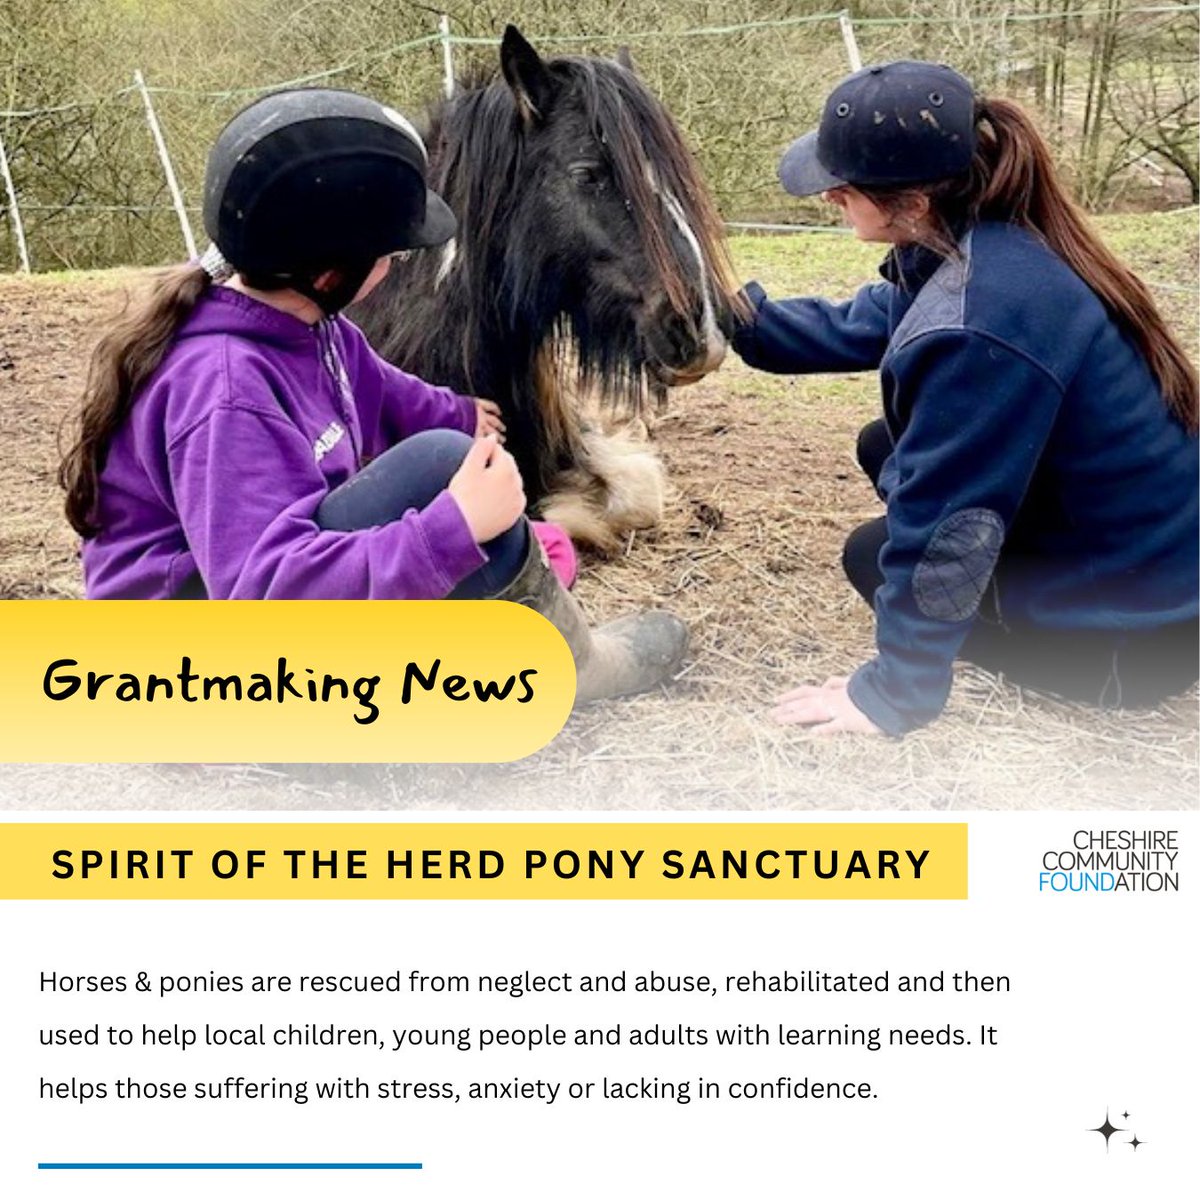 We’re proud to award grants to charities and organisations in Cheshire & Warrington. In the spotlight this week is @spiritherd Pony Sanctuary 🐴 Allowing people of all ages with physical, mental and emotional challenges to improve confidence & self-esteem #Cheshire